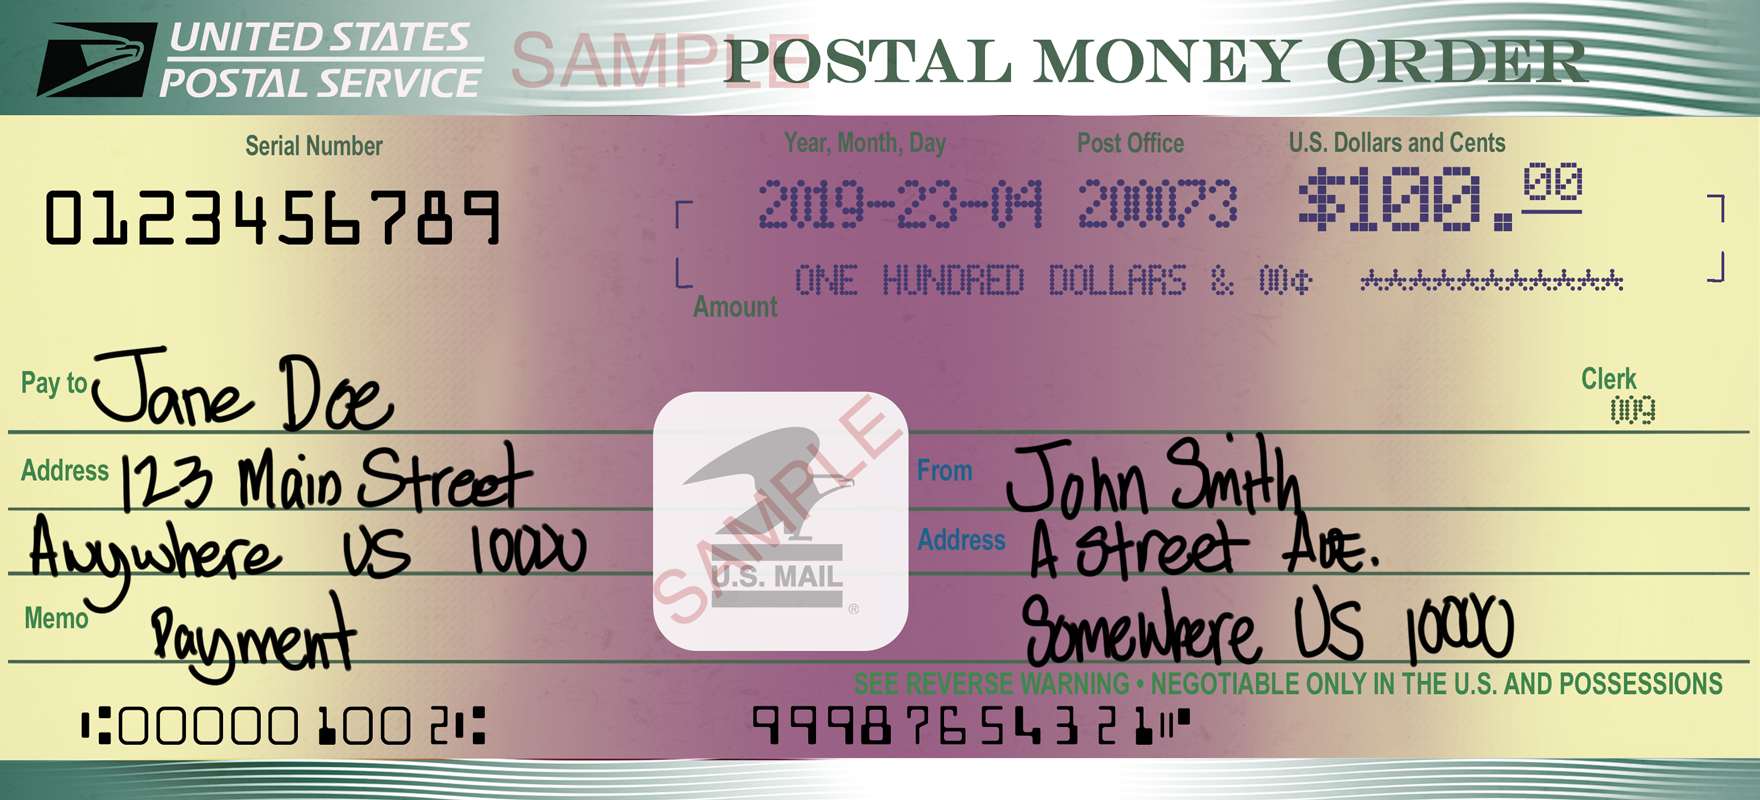 There S More Than 1 Kind Of Check Here Are 5 More You Might Need - money orders are prepaid paper certificates that function like a check the listed recipient can deposit or cash them